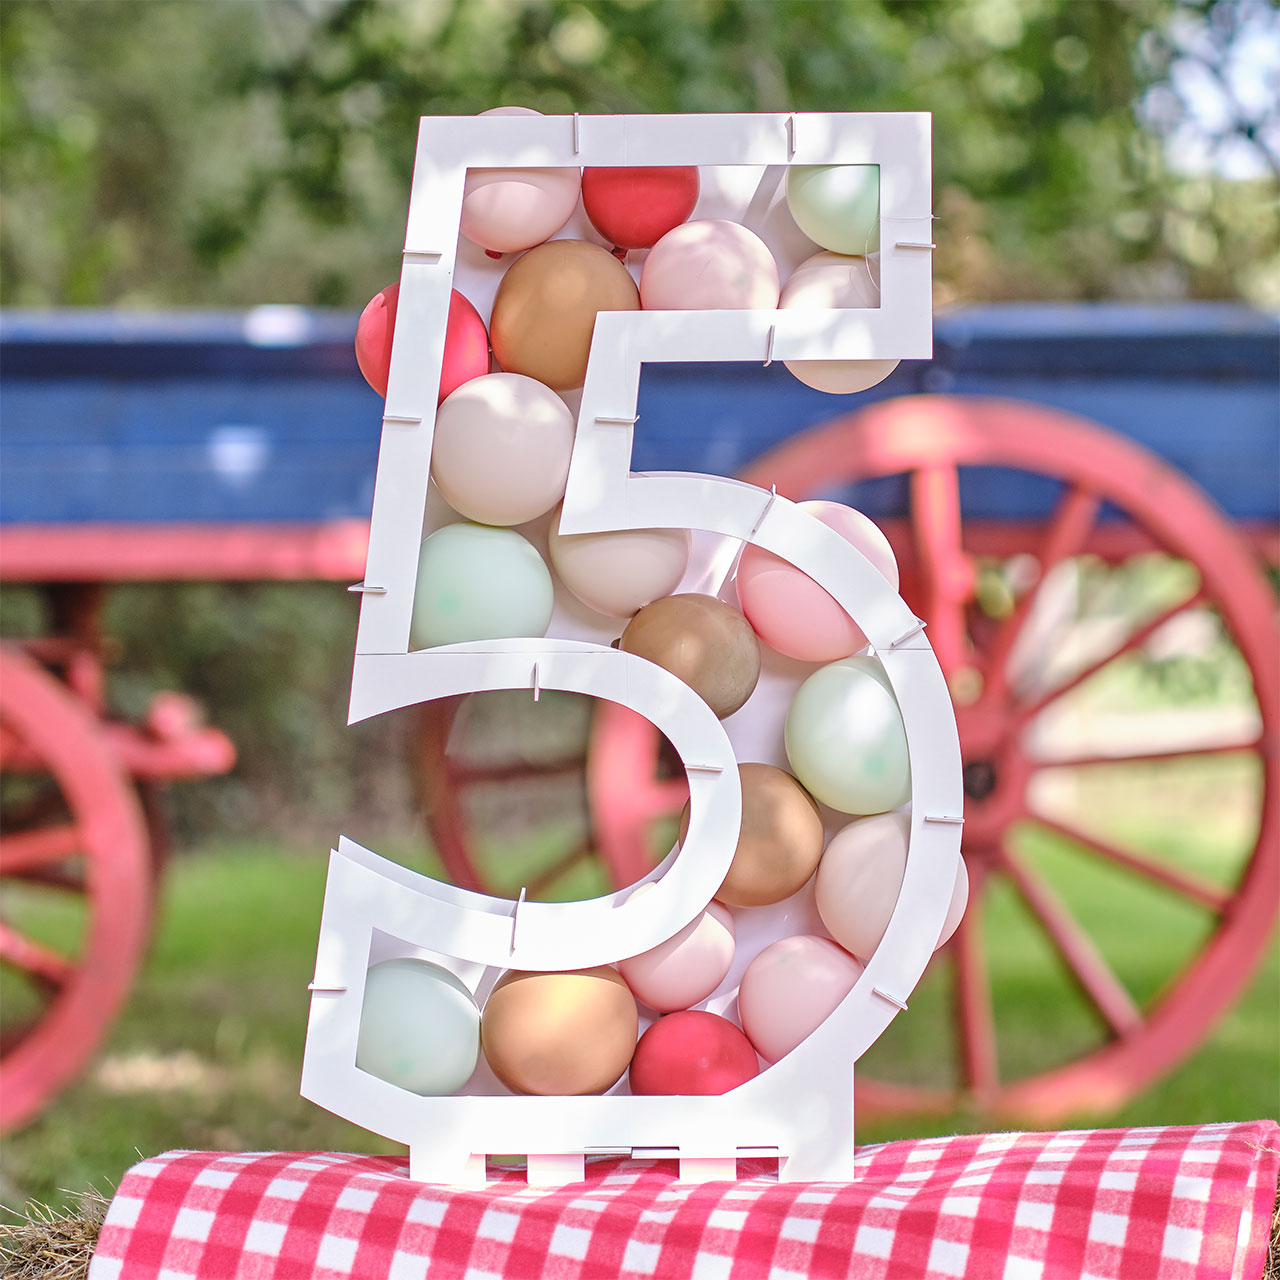 Balloon Mosaic Number  "5" Stand 